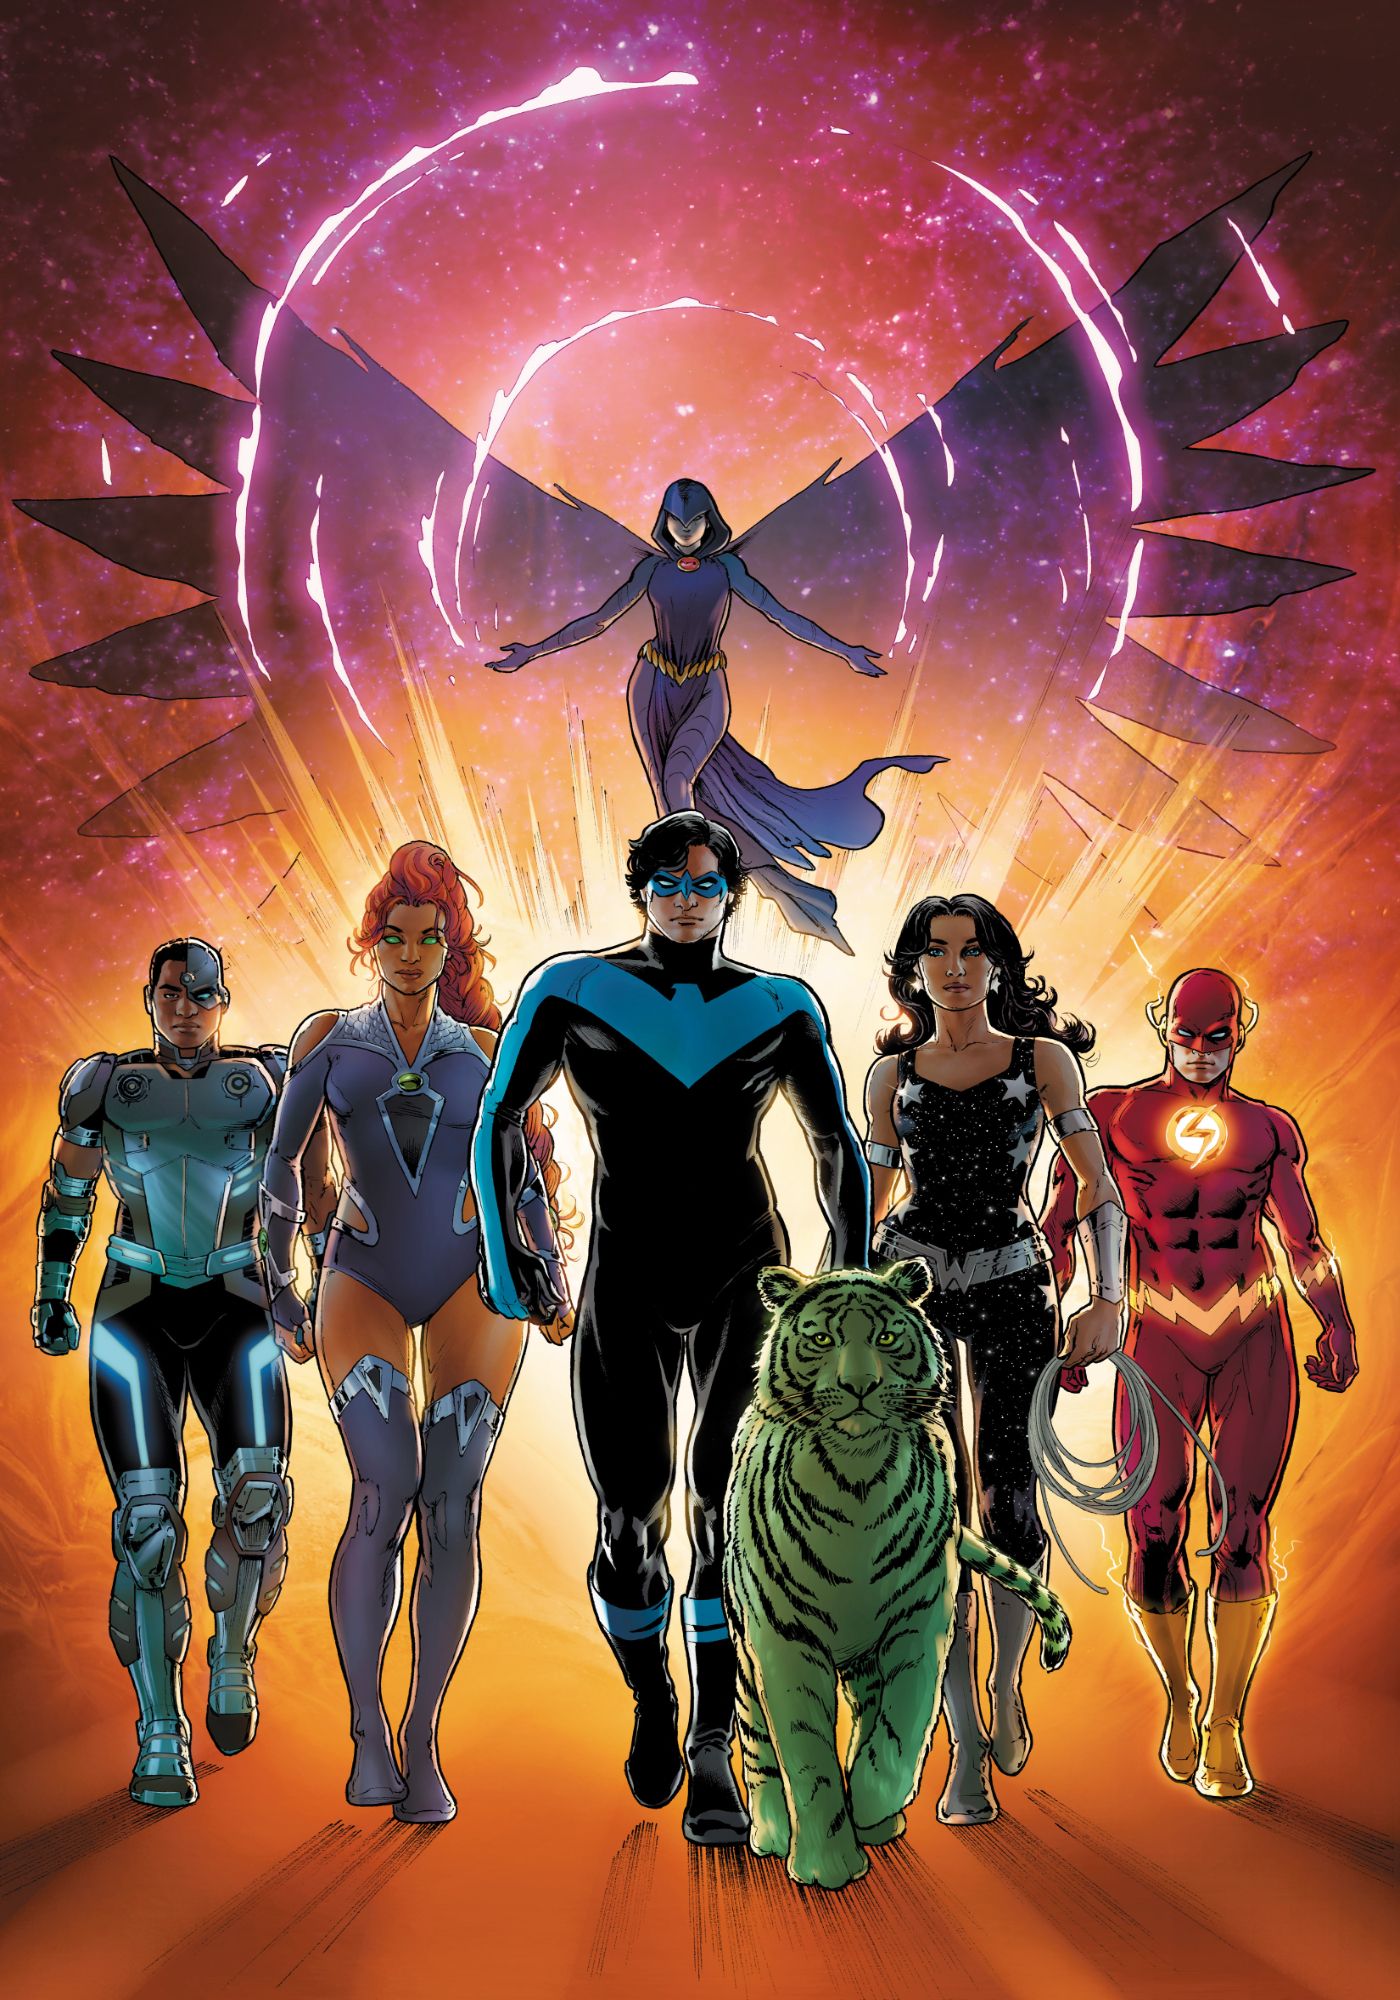 Titans including Beast Boy (as a tiger) Kid Flash, Nightwing, Starfire, Cyborg, and Raven